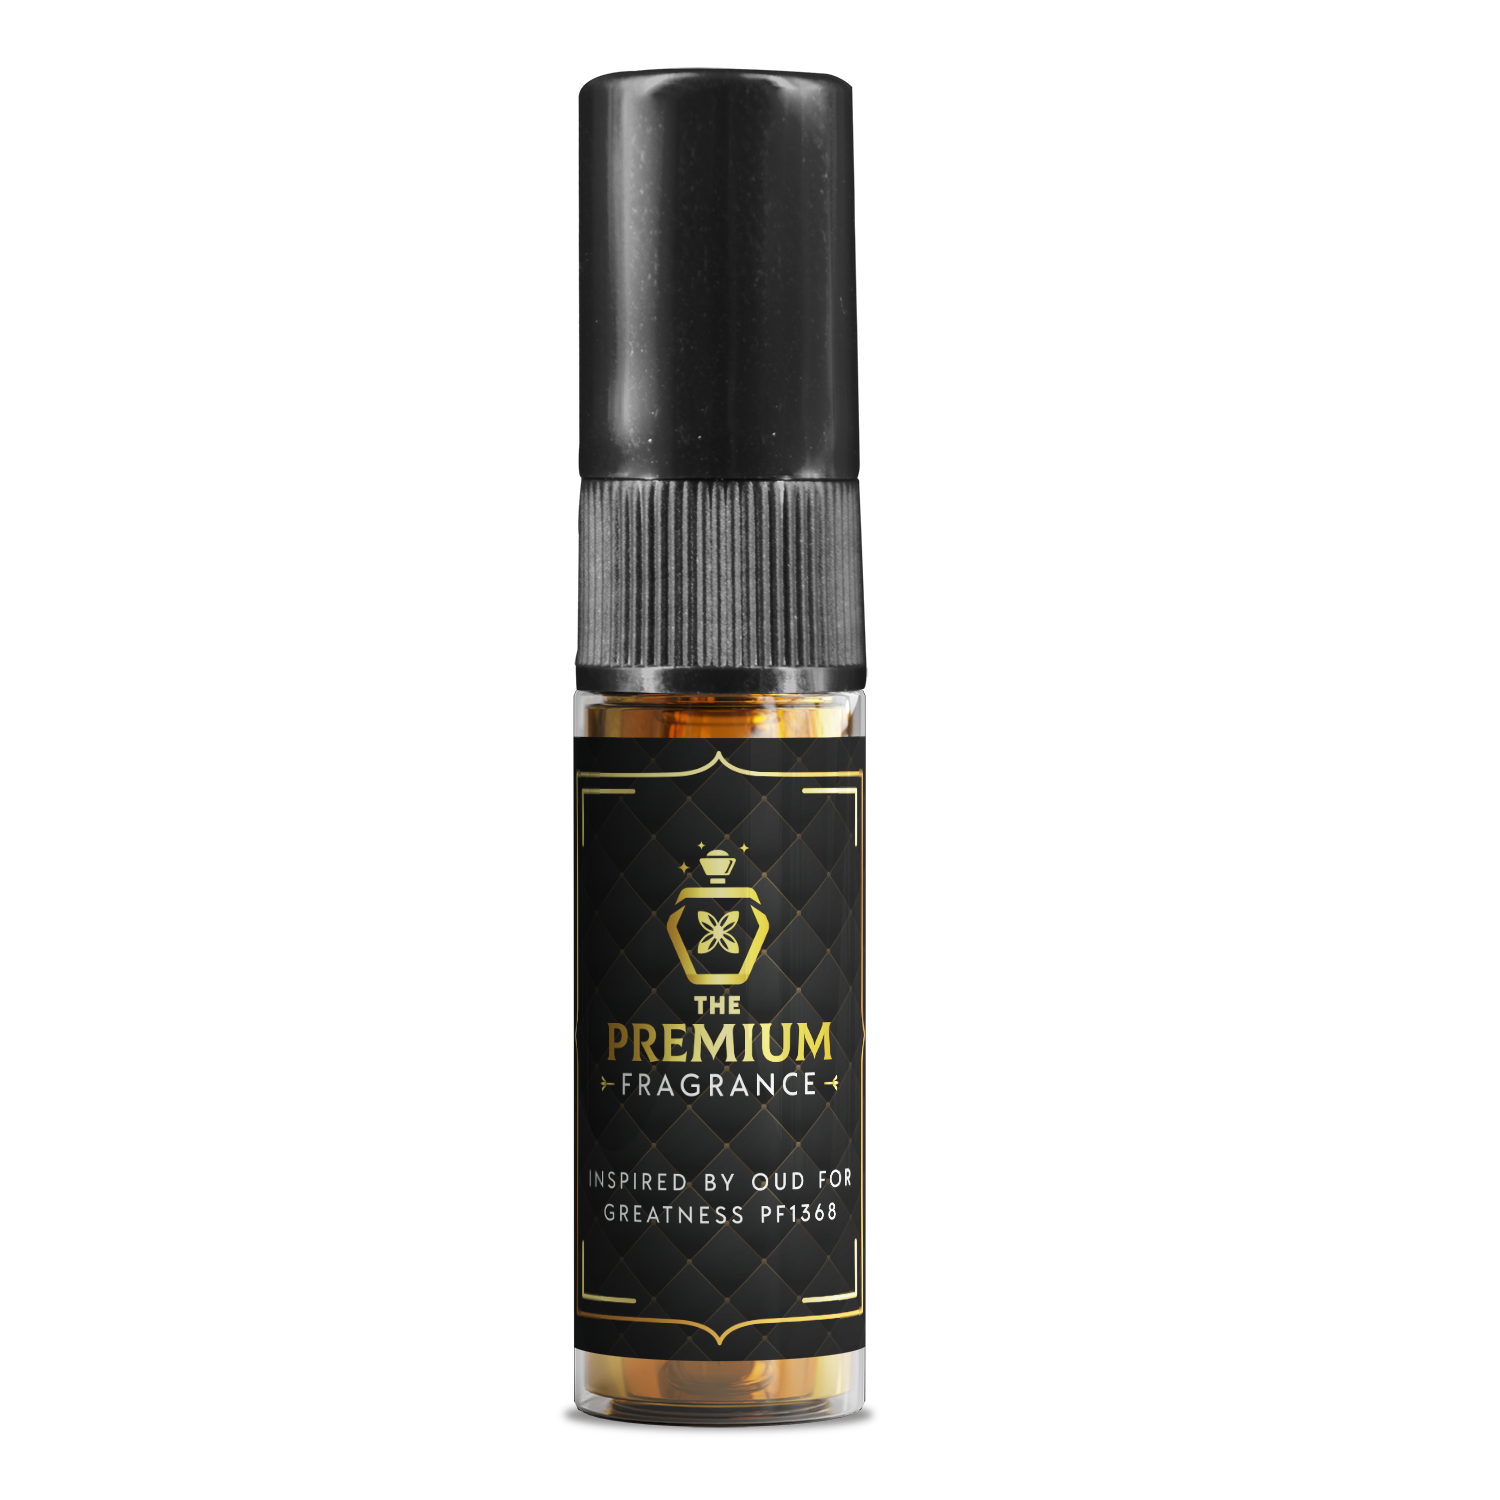 Fragrance Inspired by Oud For Greatness 3ml The Premium Fragrance PF1368